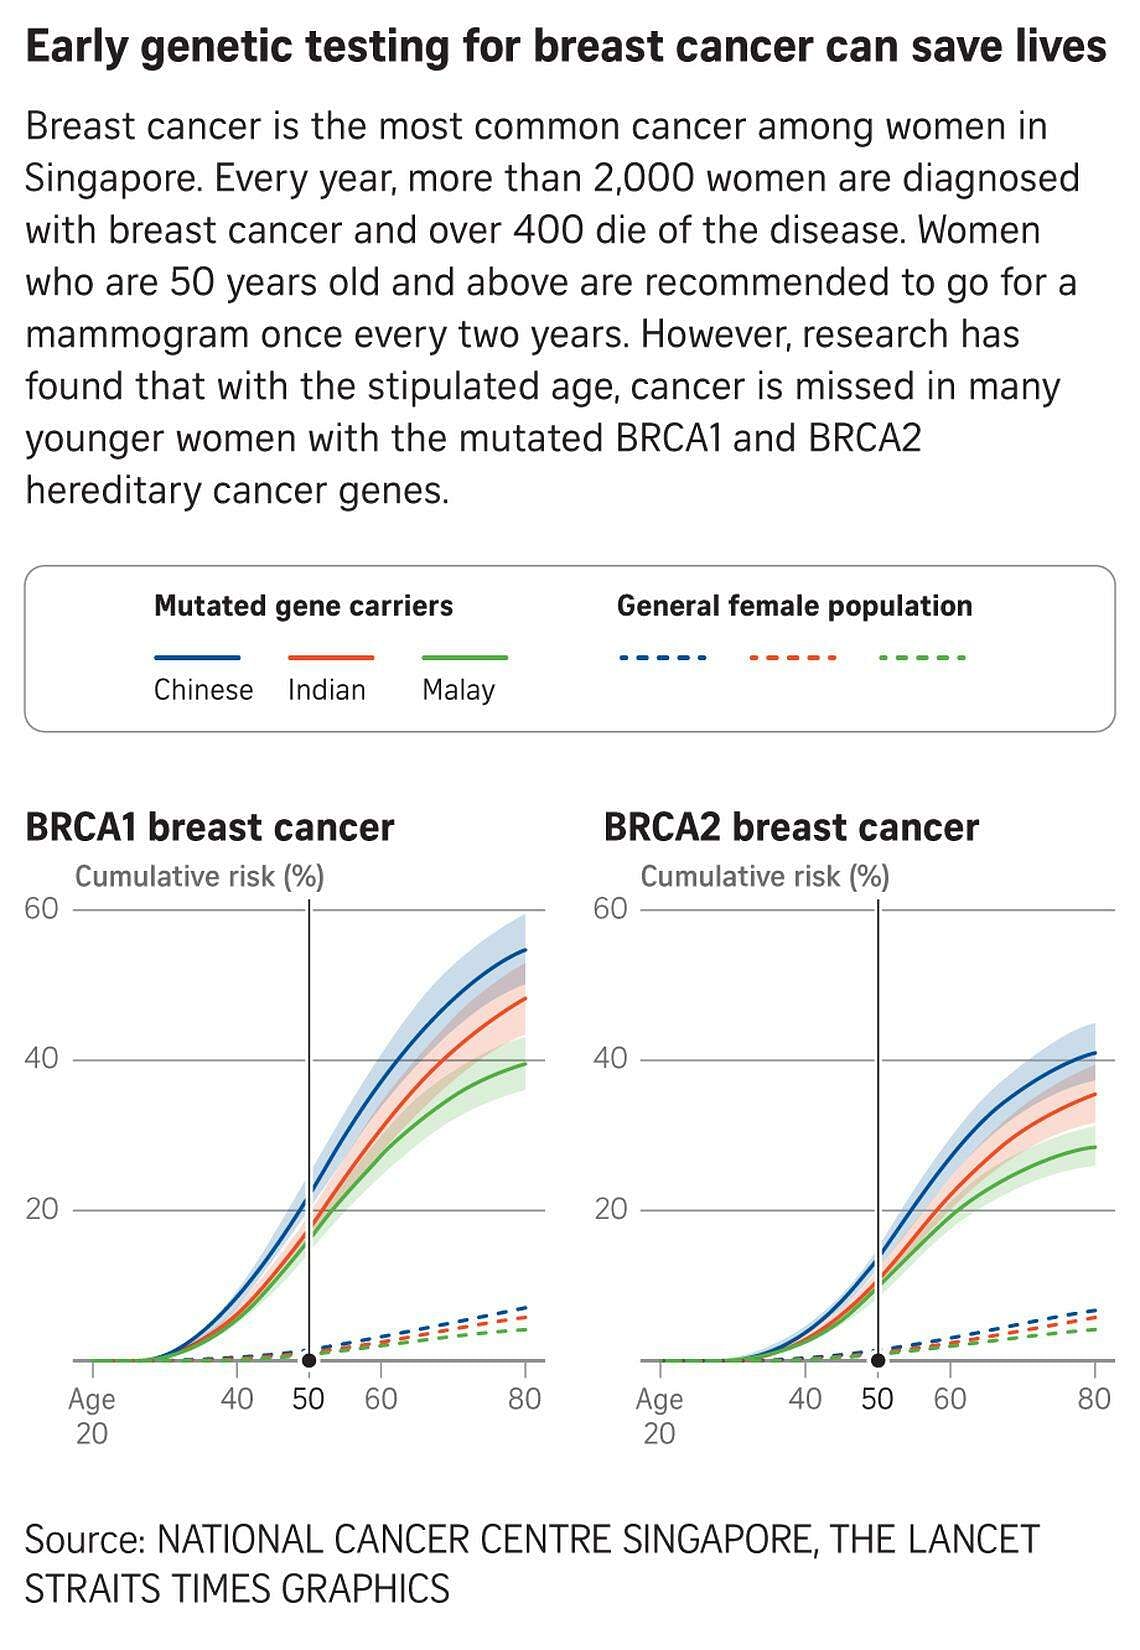 Breast, ovarian cancers: DNA test, regular screening reduce mortality in women with gene mutations